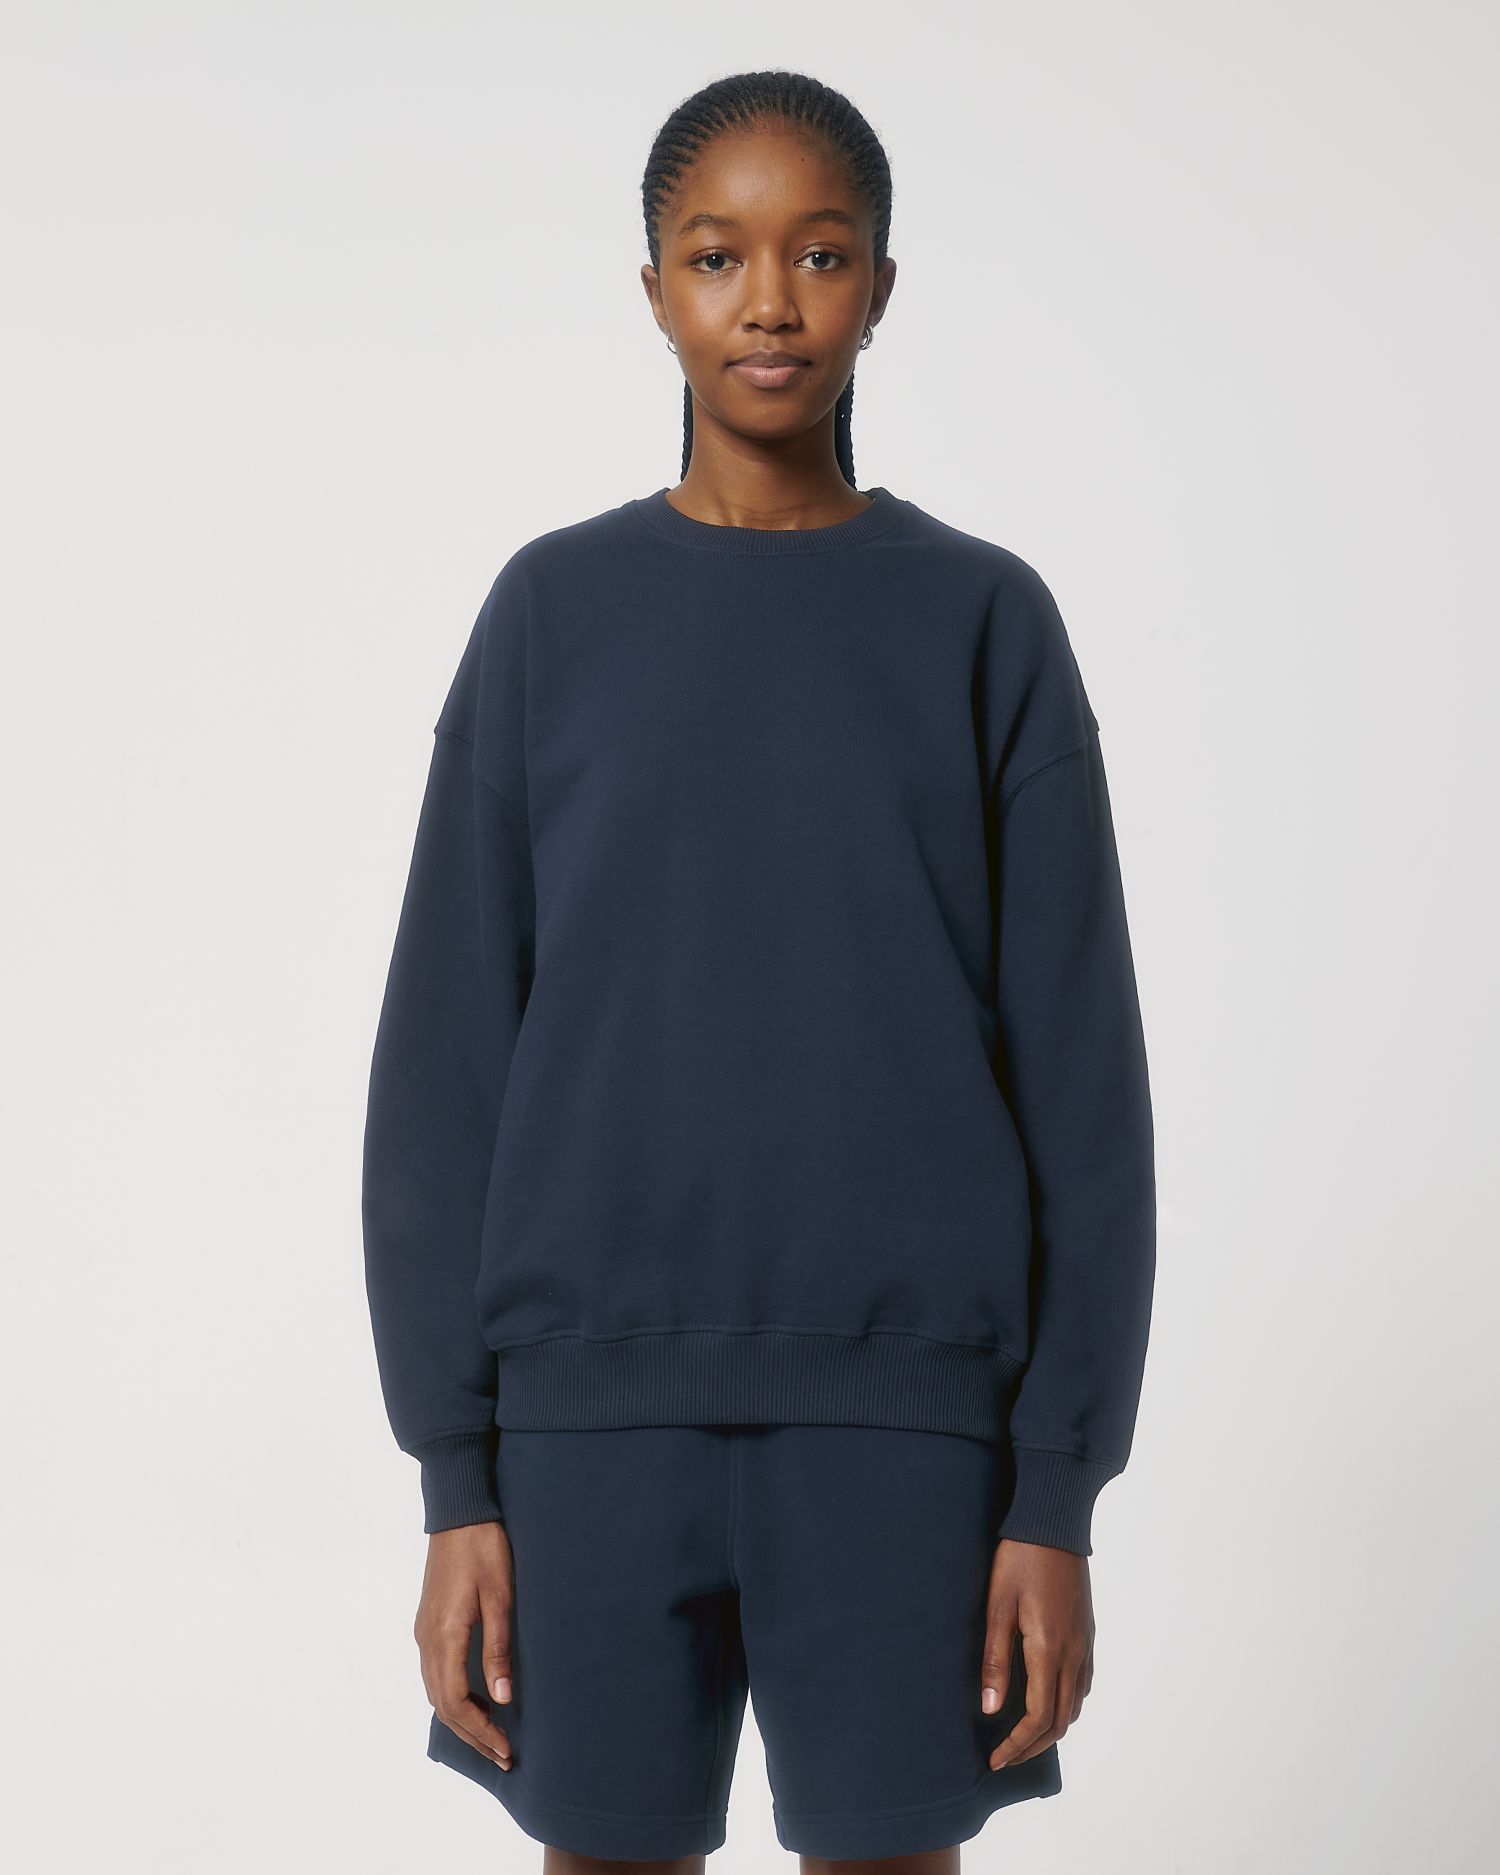 Crew neck sweatshirts Ledger Dry in Farbe French Navy